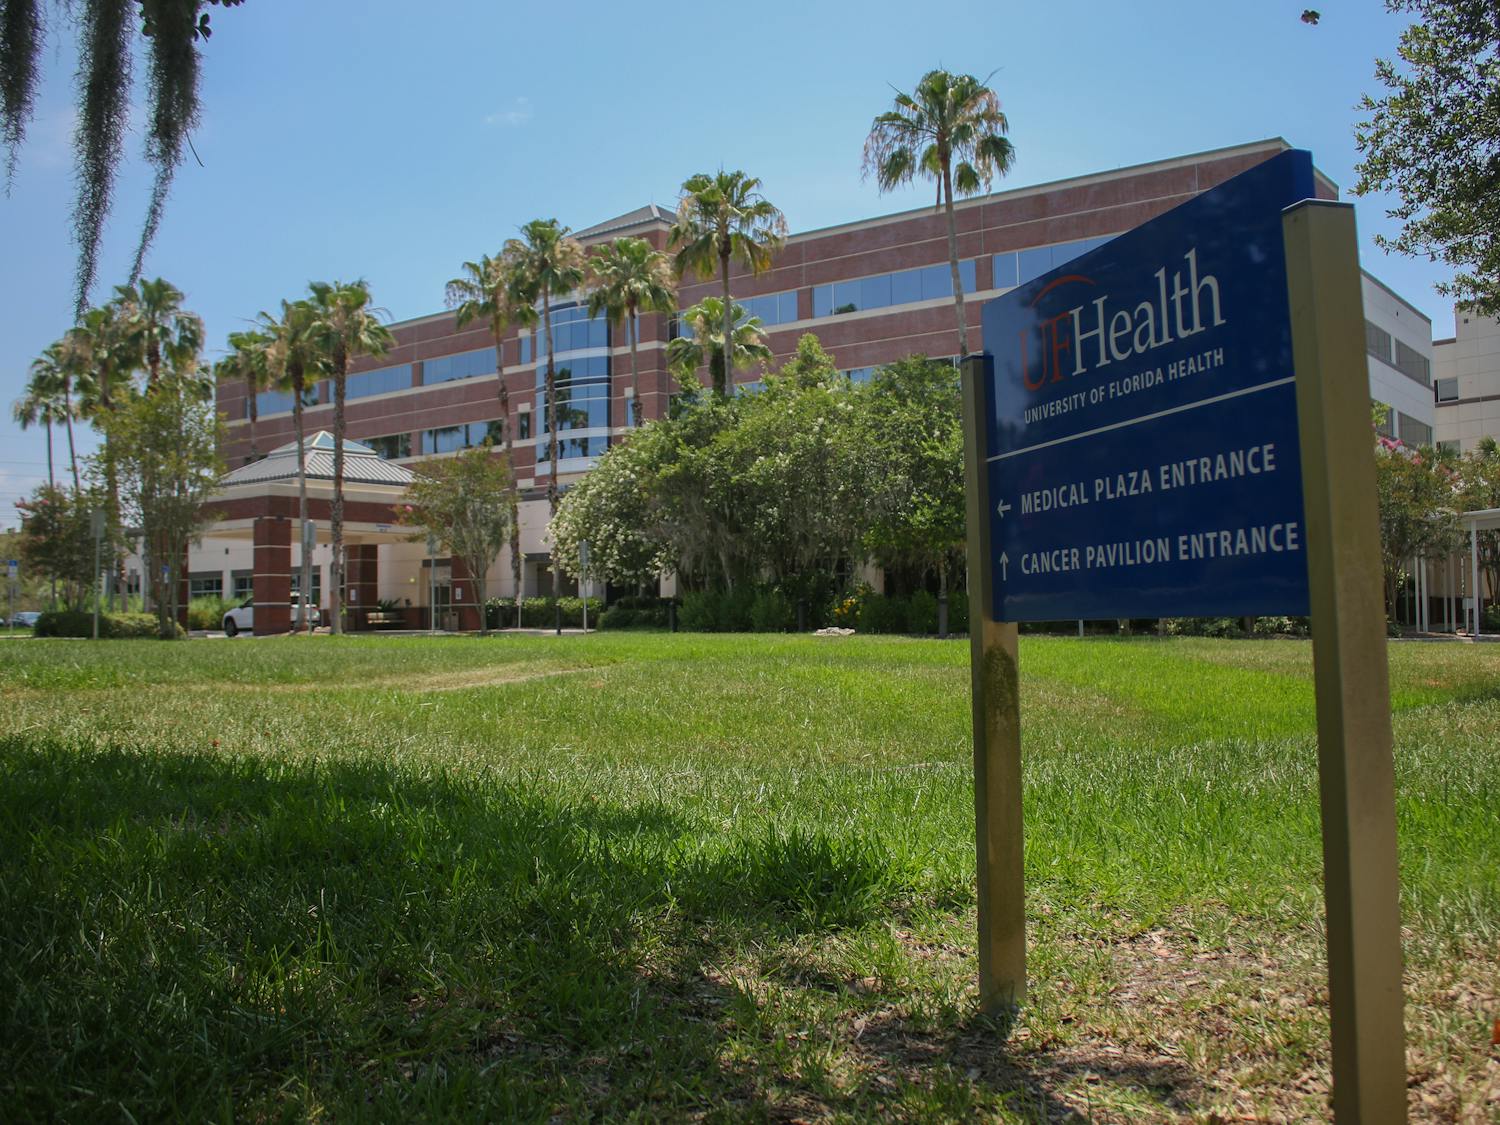 UF Health Family Medical Center opened in Bradford County on May 1.